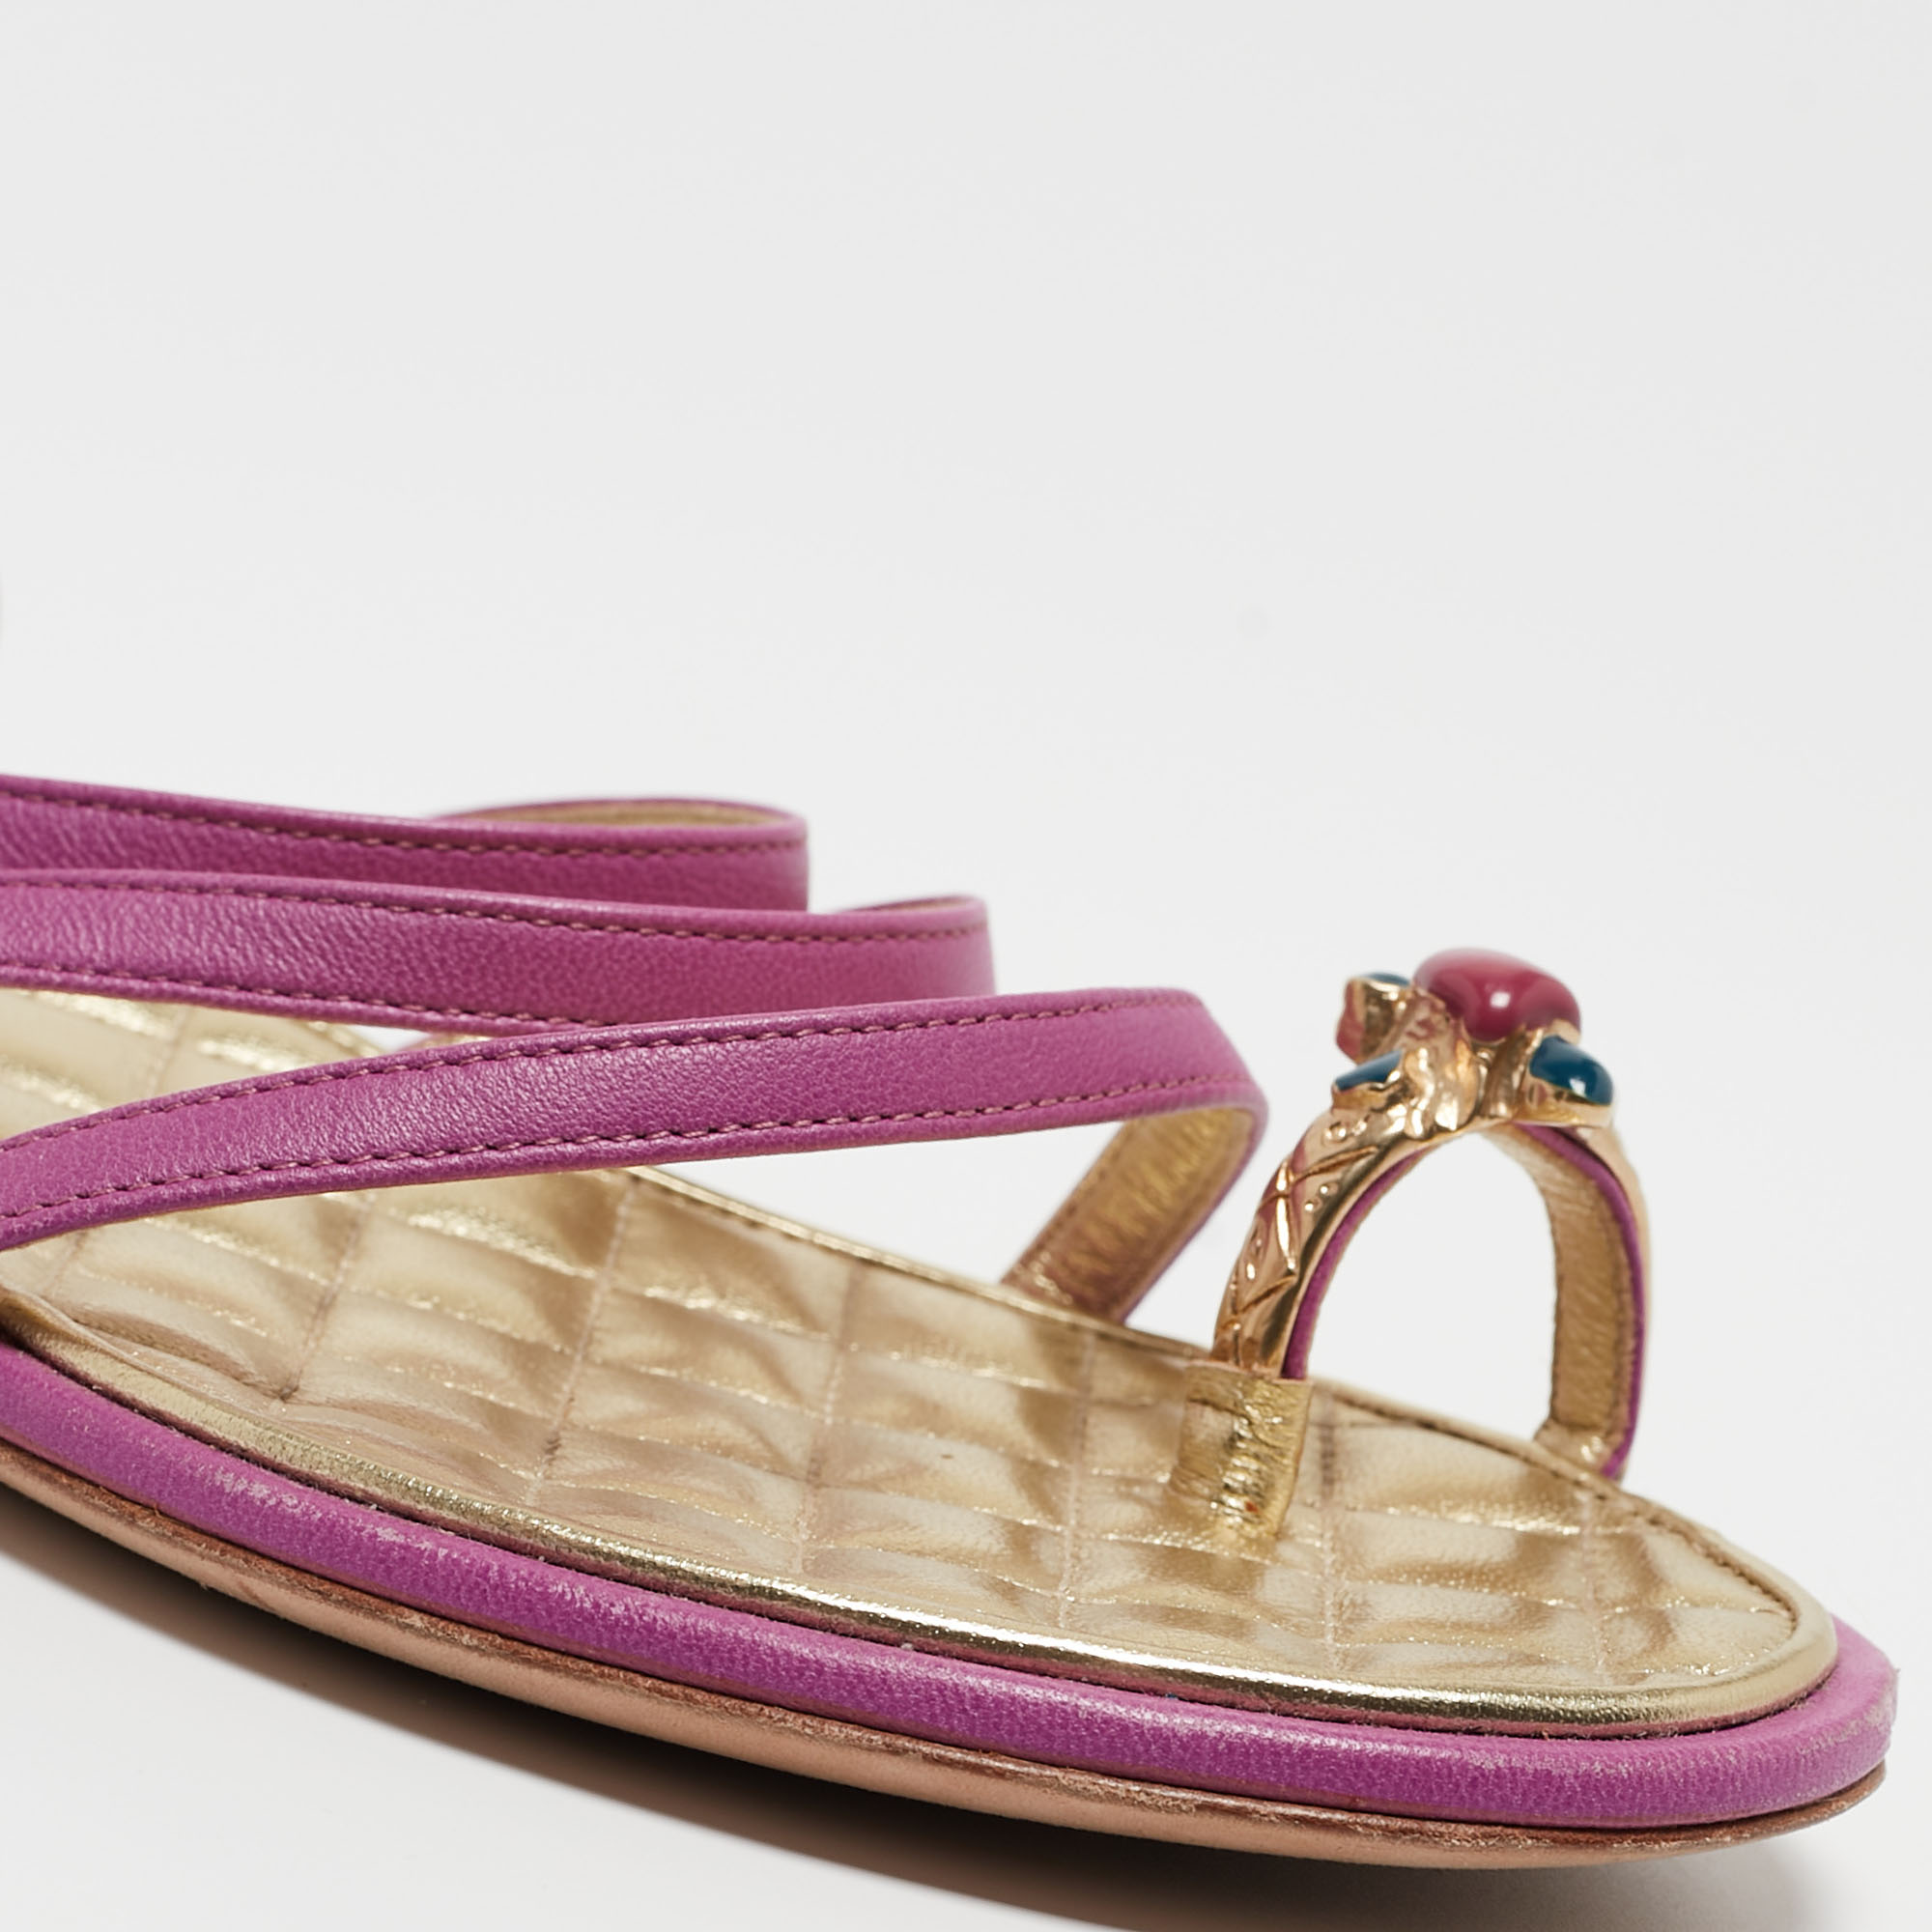 Chanel Purple Leather Embellished Toe Ring Ankle Strap Flat Sandals Size 36.5